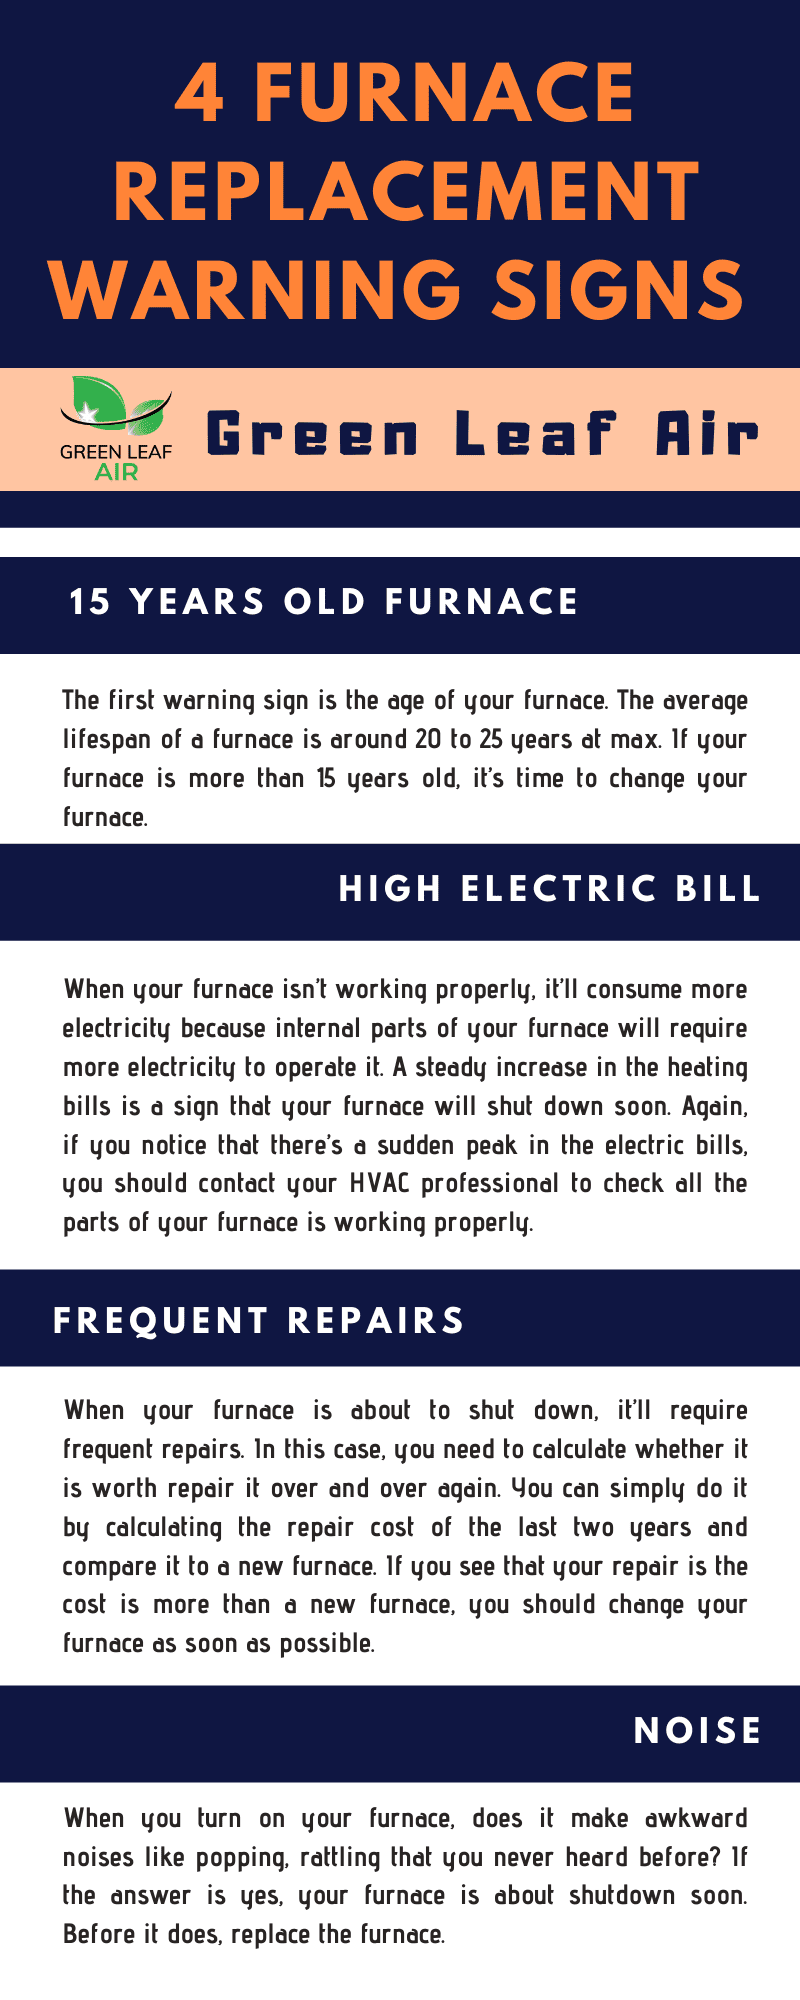 4 Furnace Replacement Warning Signs